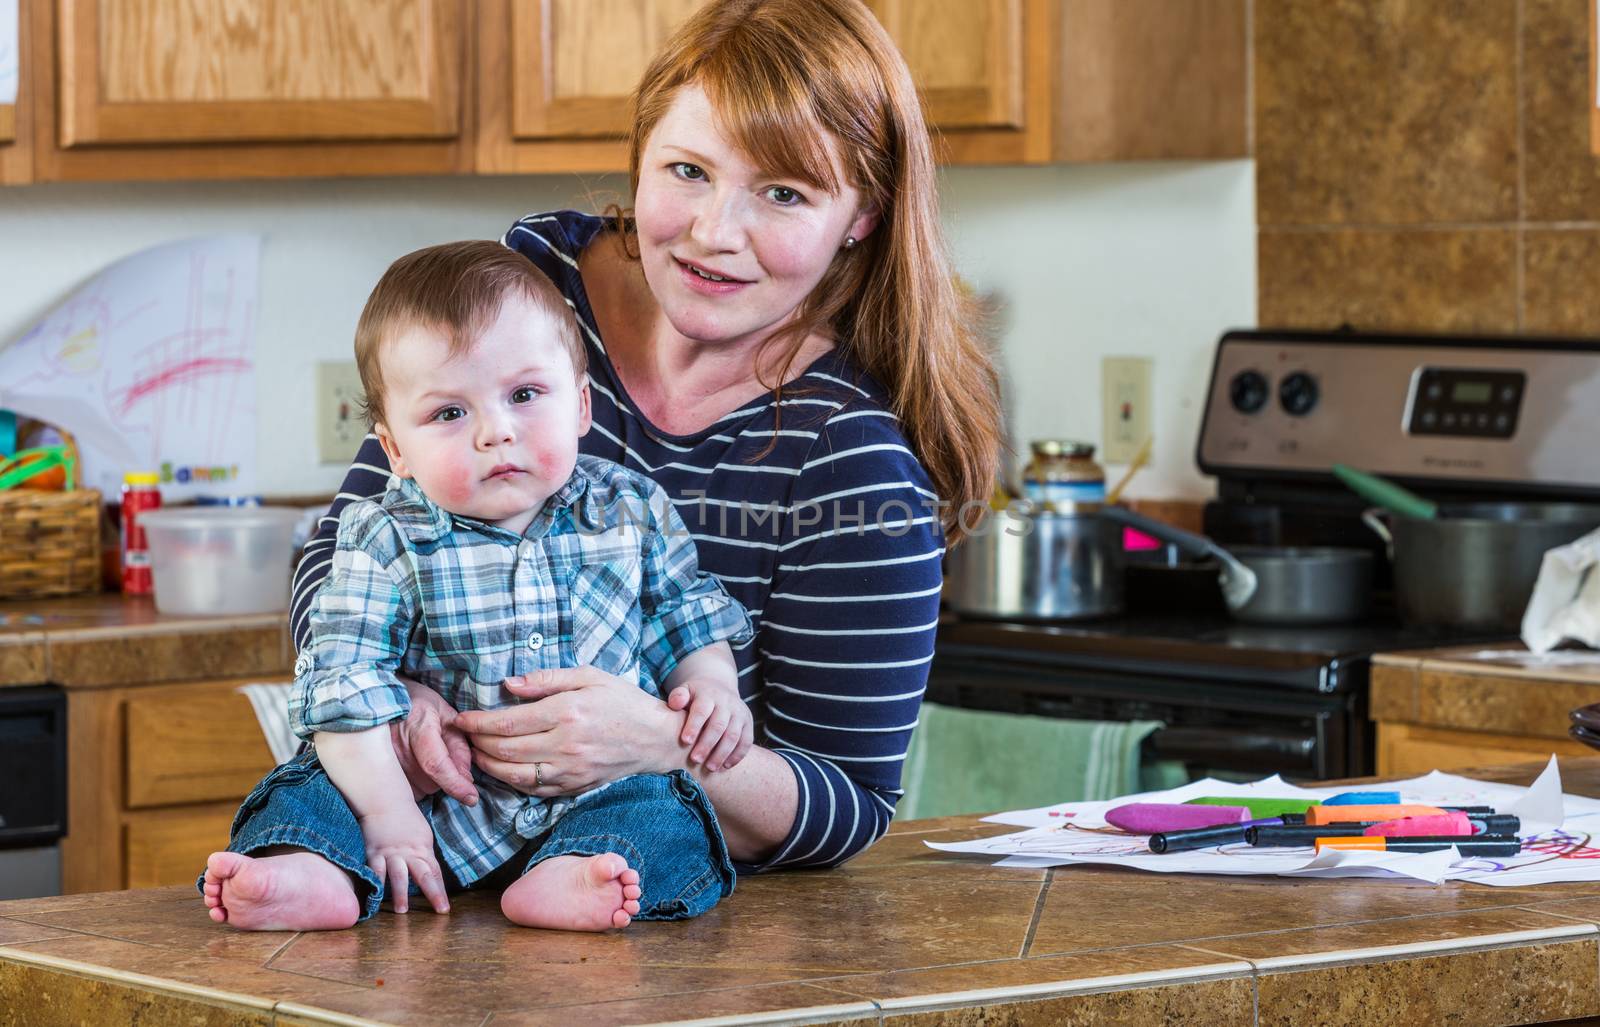 A woman in the kitchen poses with her baby